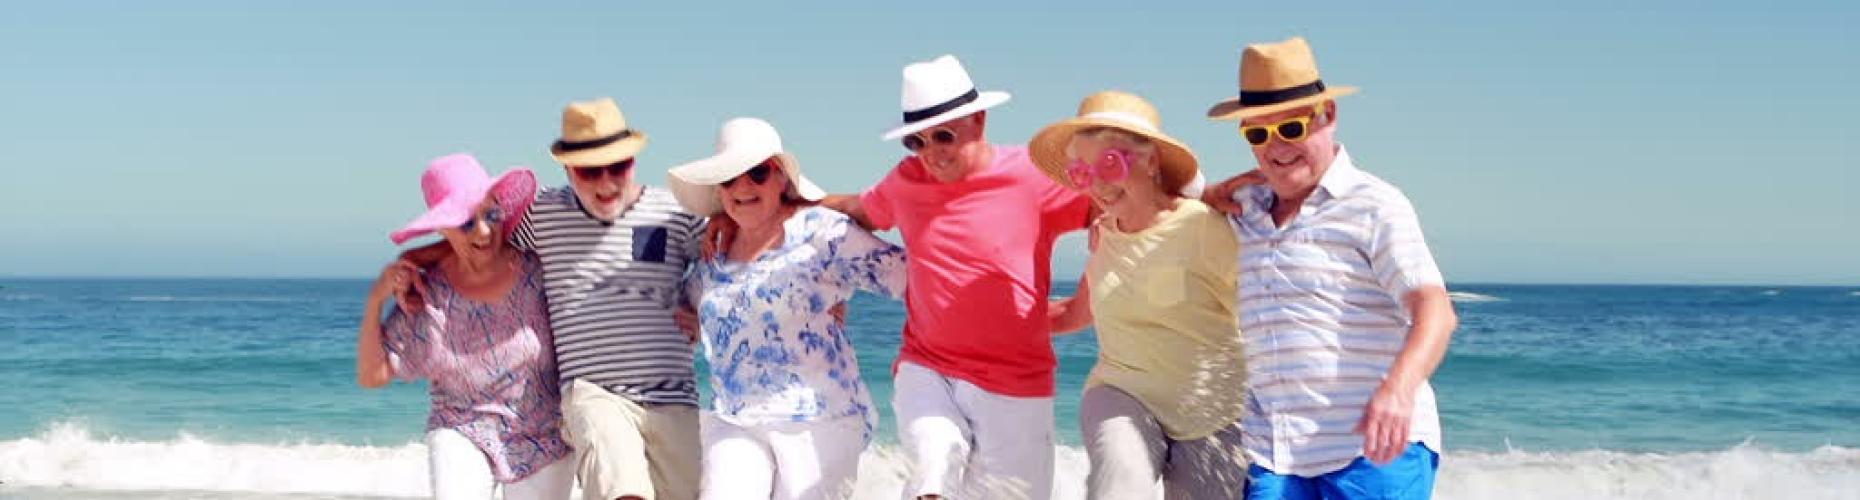 Are you over 65? Enjoy the sea with our promo!